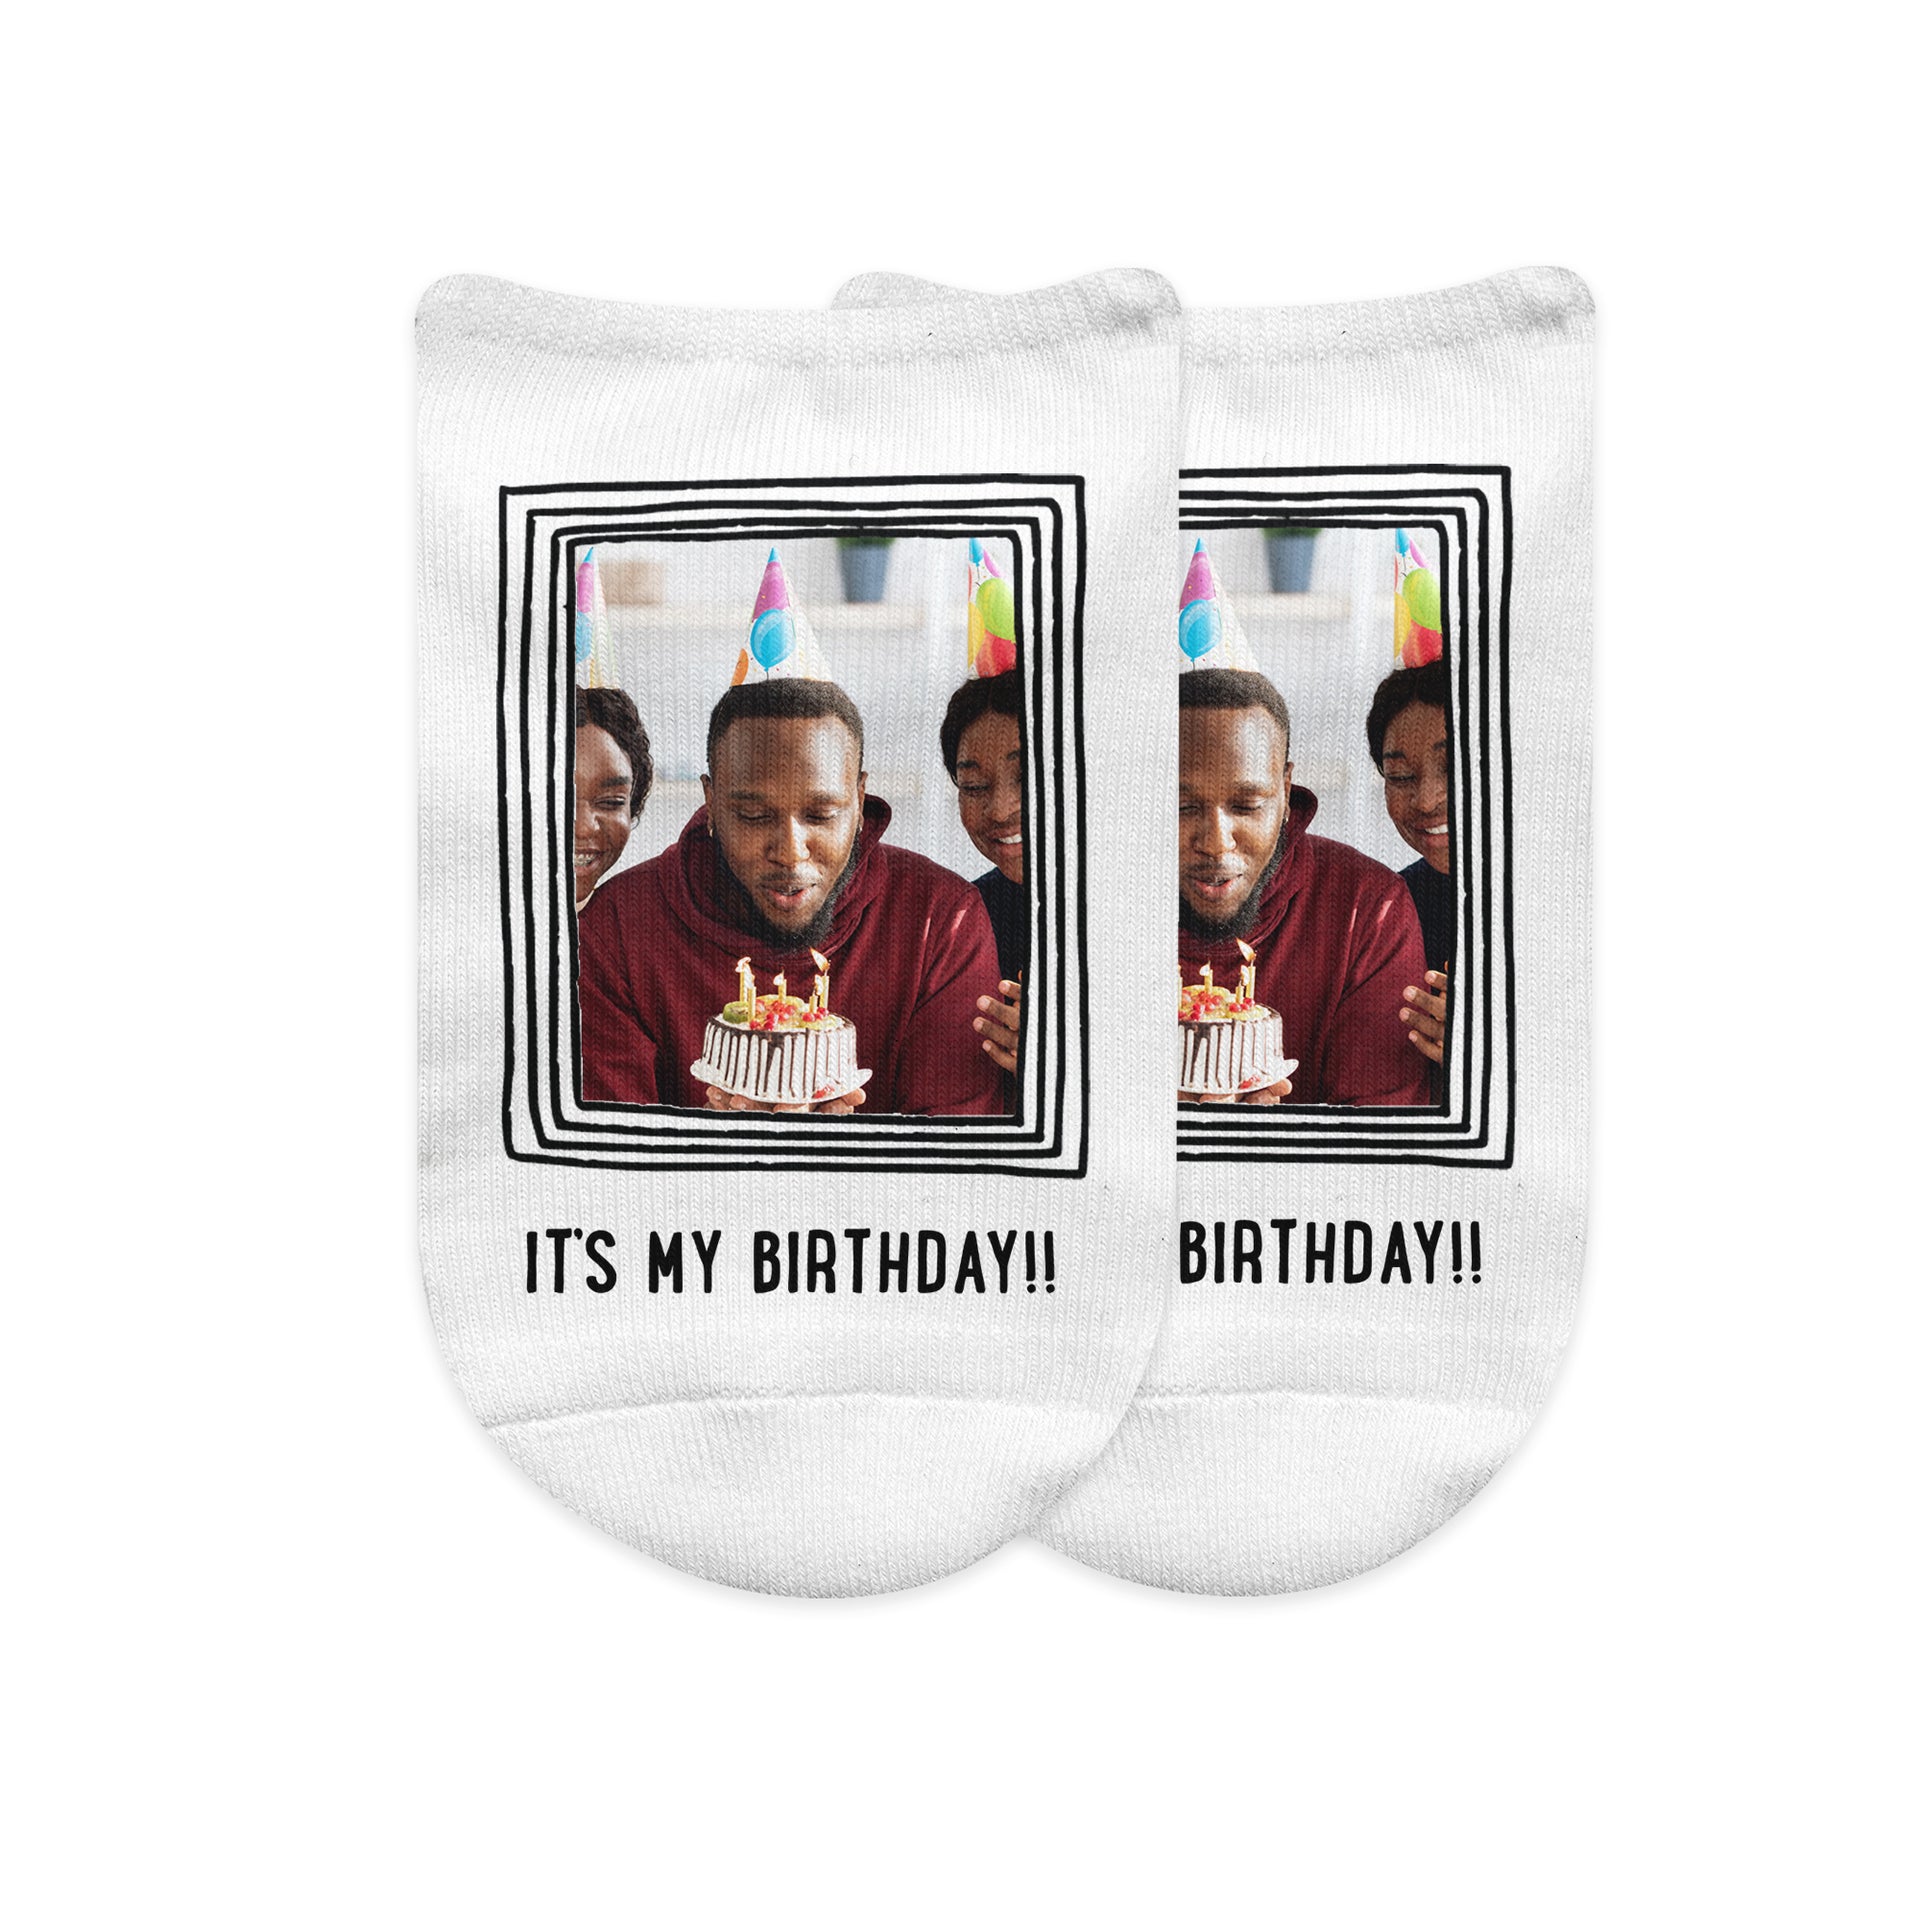 Framed lines design with your own photo and text custom printed on the top of white no show socks make these a unique pair of socks.